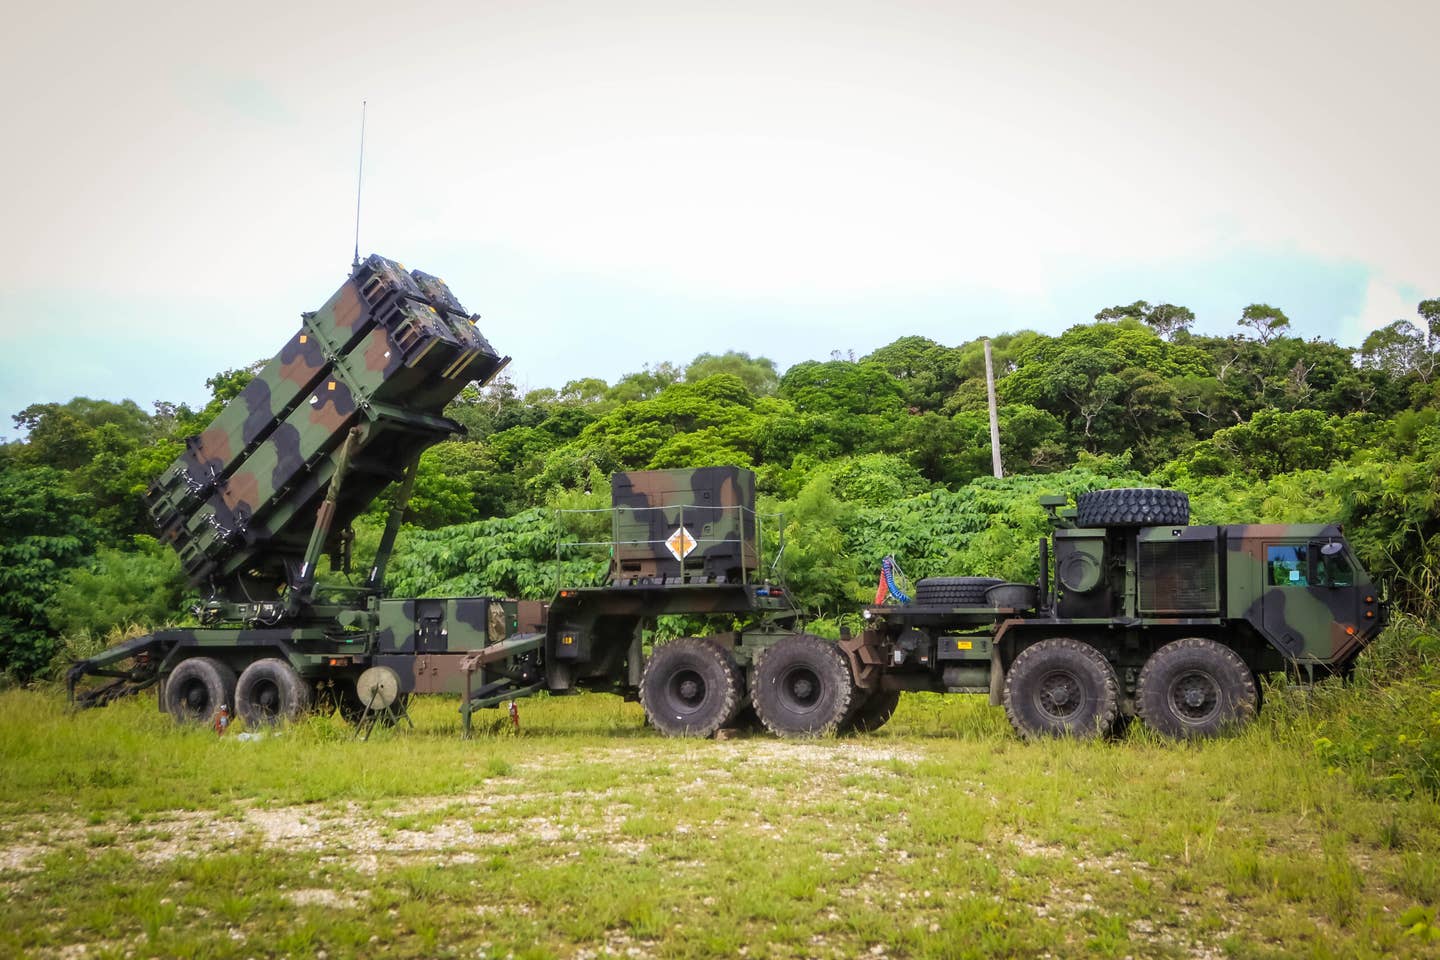 A patriot missile launcher system part of 1st Battalion, 1st Air Defense Artillery Regiment, sits in a training area during the unit’s table gunnery training exercise on Kadena Air Base in Japan, Oct. 19, 2017.  (U.S. Army Photo by Capt. Adan Cazarez)